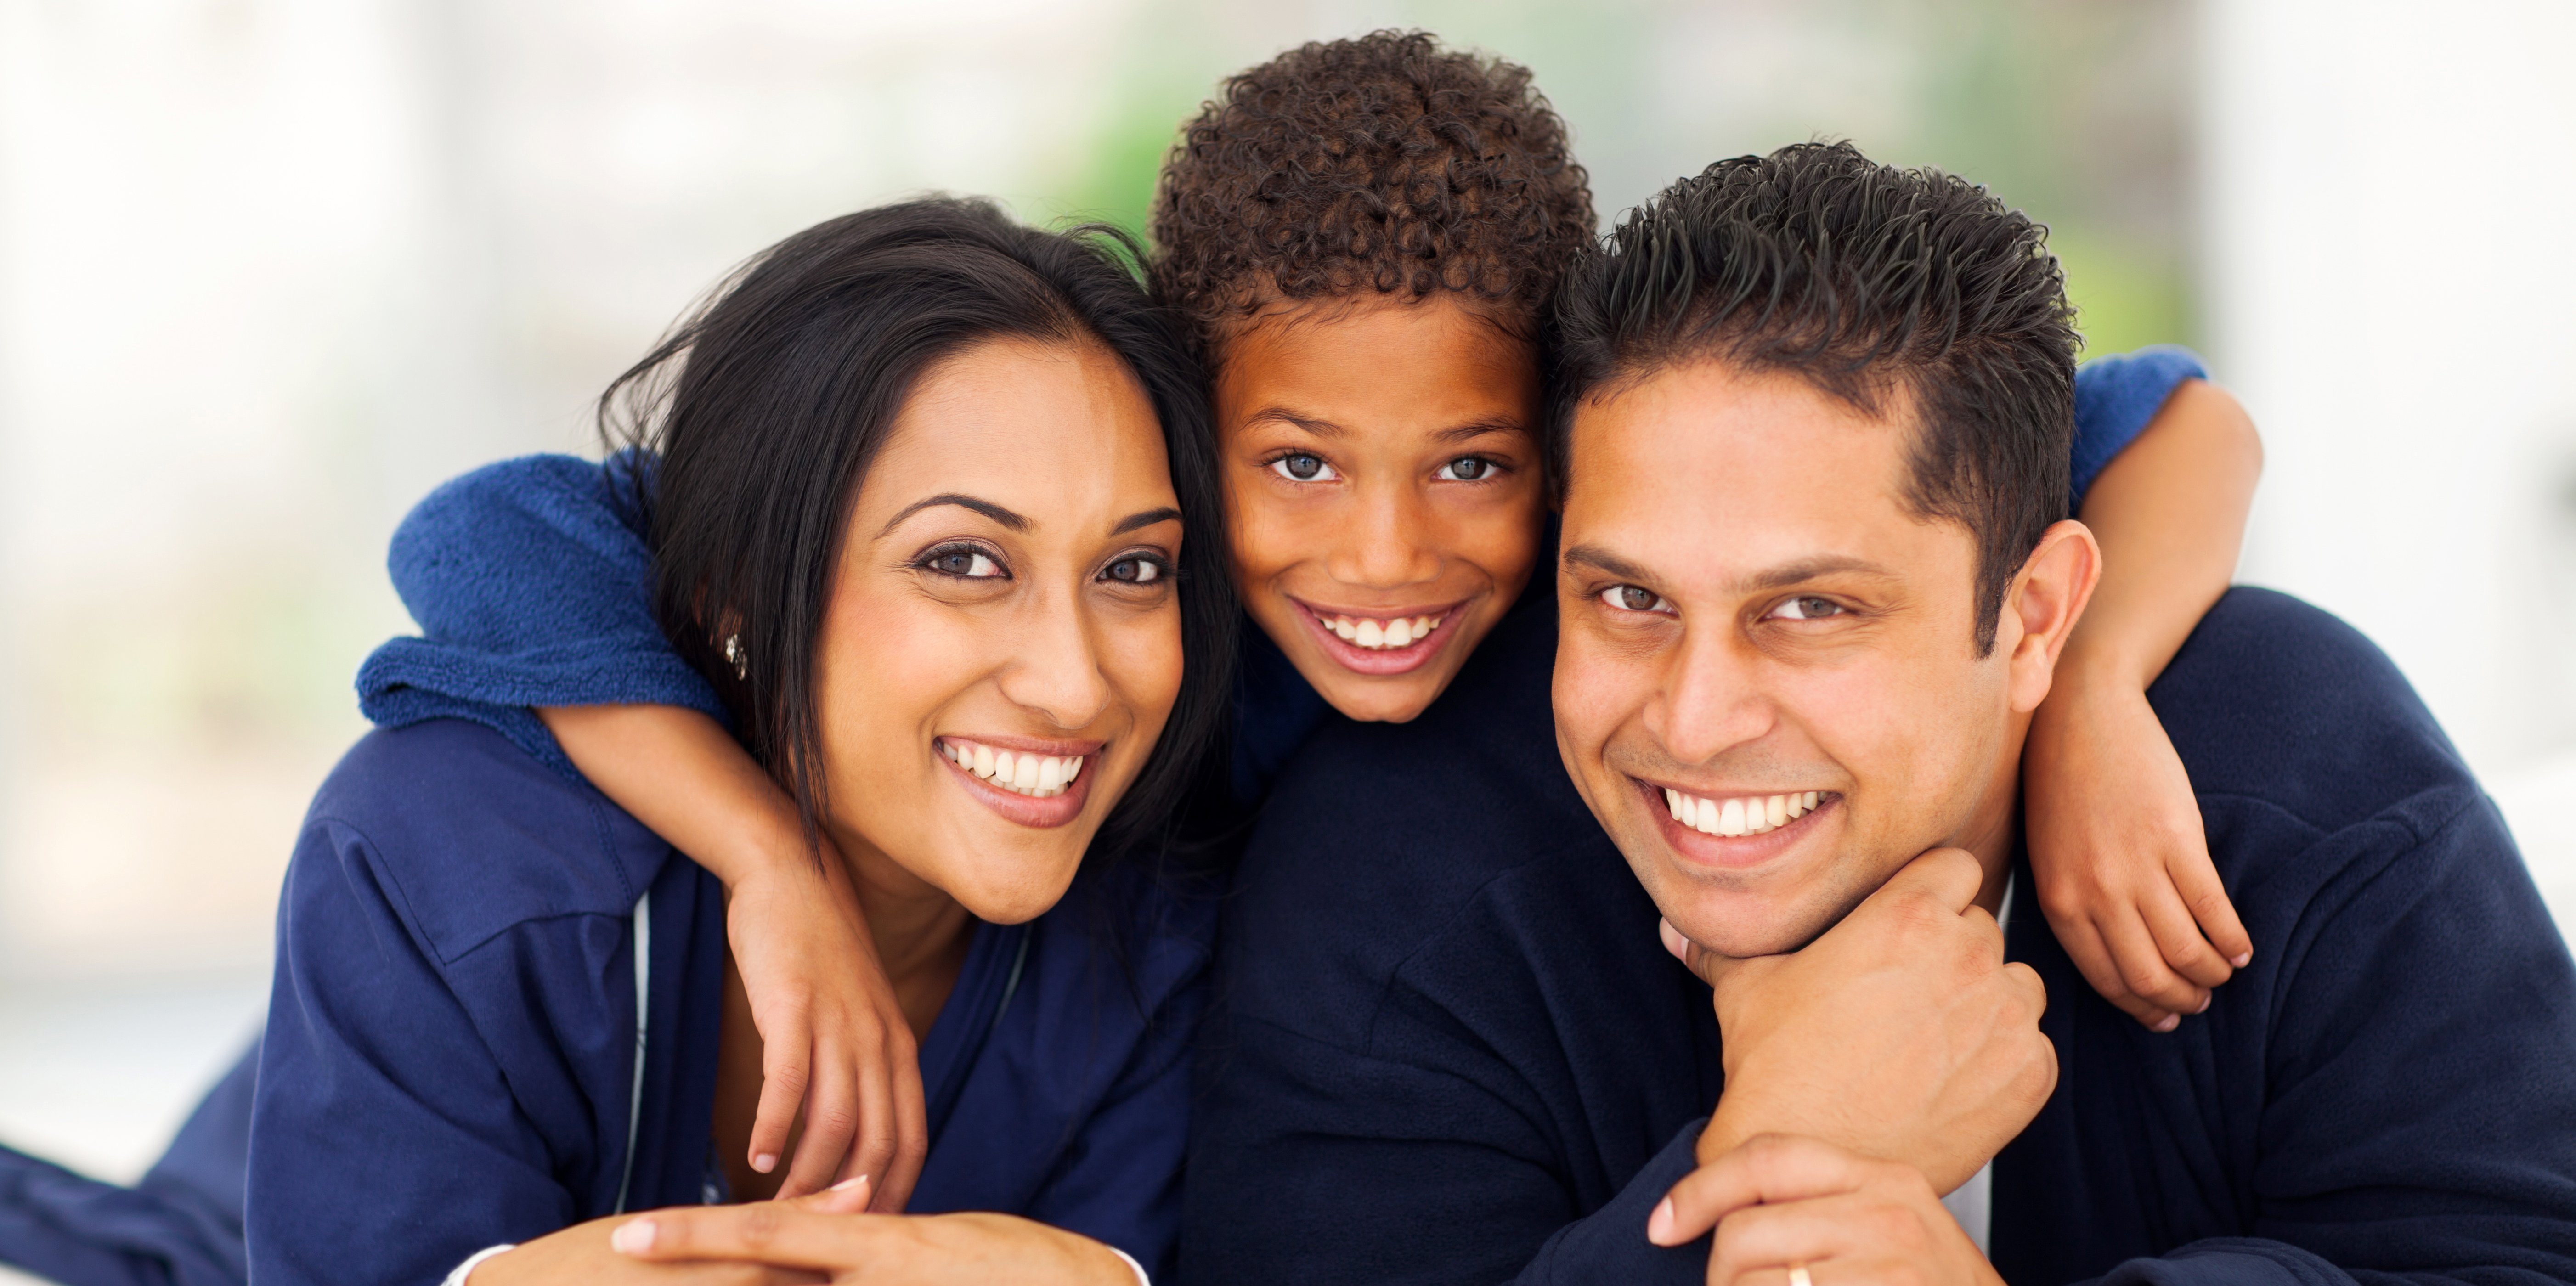 Woman, boy, and man who are happy with the dentists and dental service at Family Dental Care in Temple Hills, MD